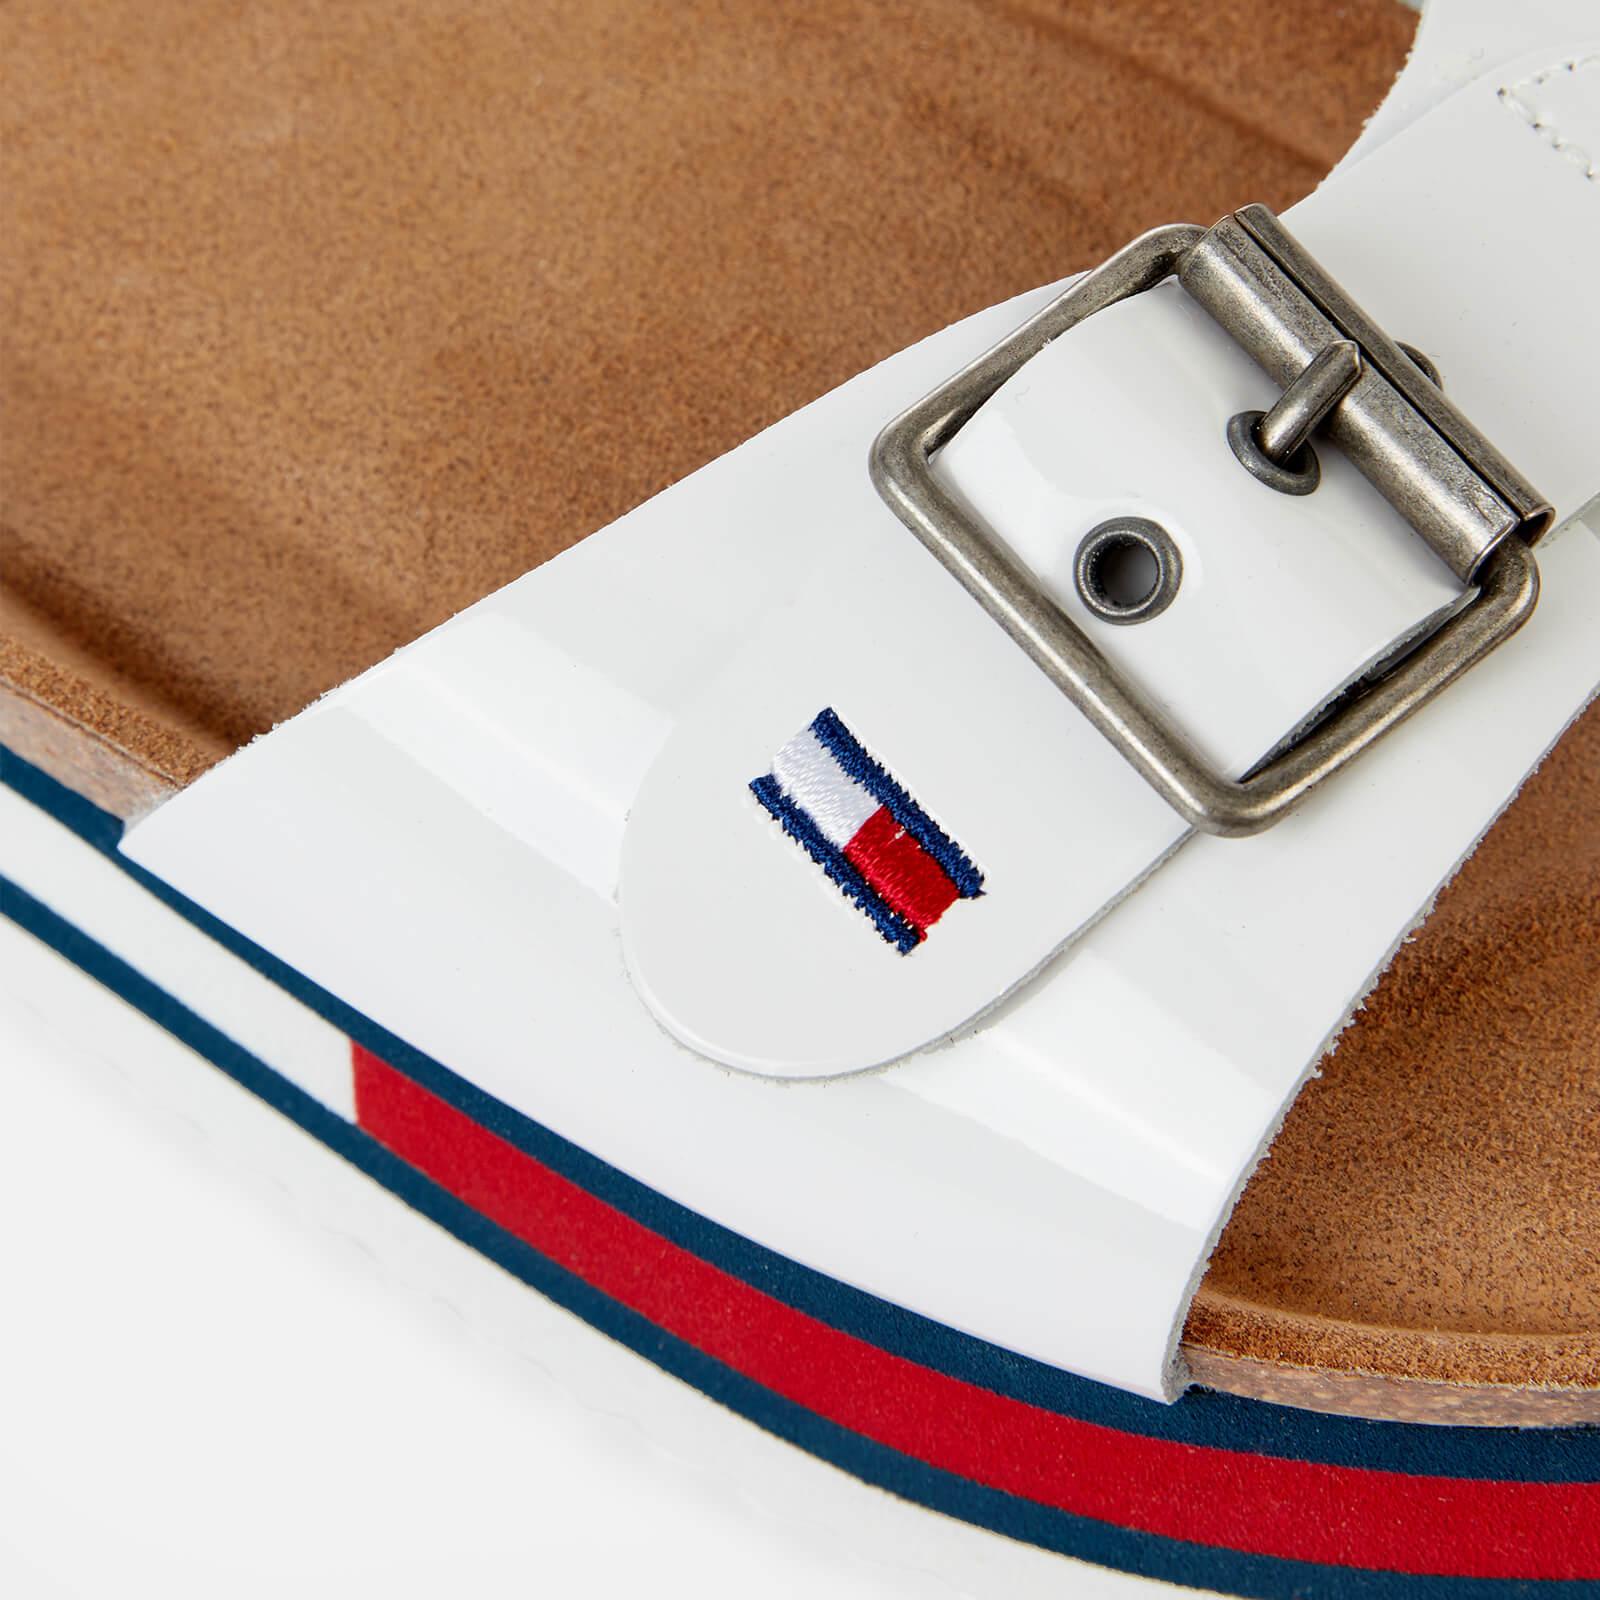 Tommy Hilfiger Flag Outsole Mule Sandals in White | Lyst